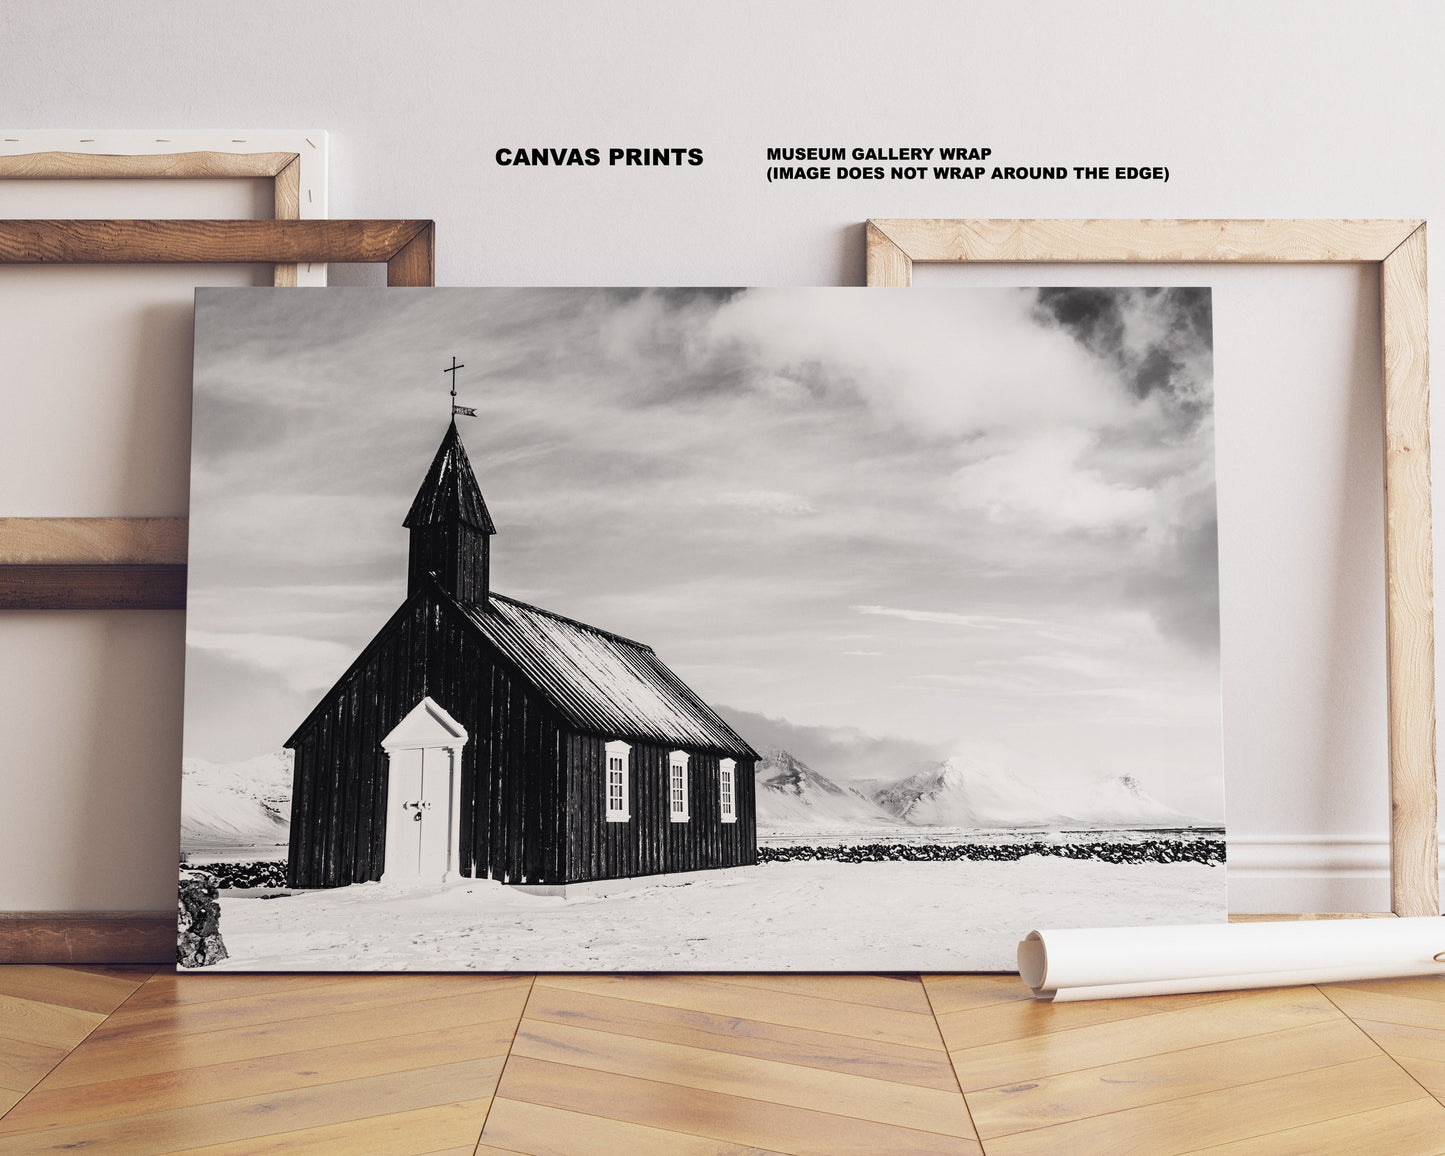 Budir Church Print - Iceland Photography Print - Iceland Wall Art - Iceland Poster - Black and White Photography - Landscape - Black Church